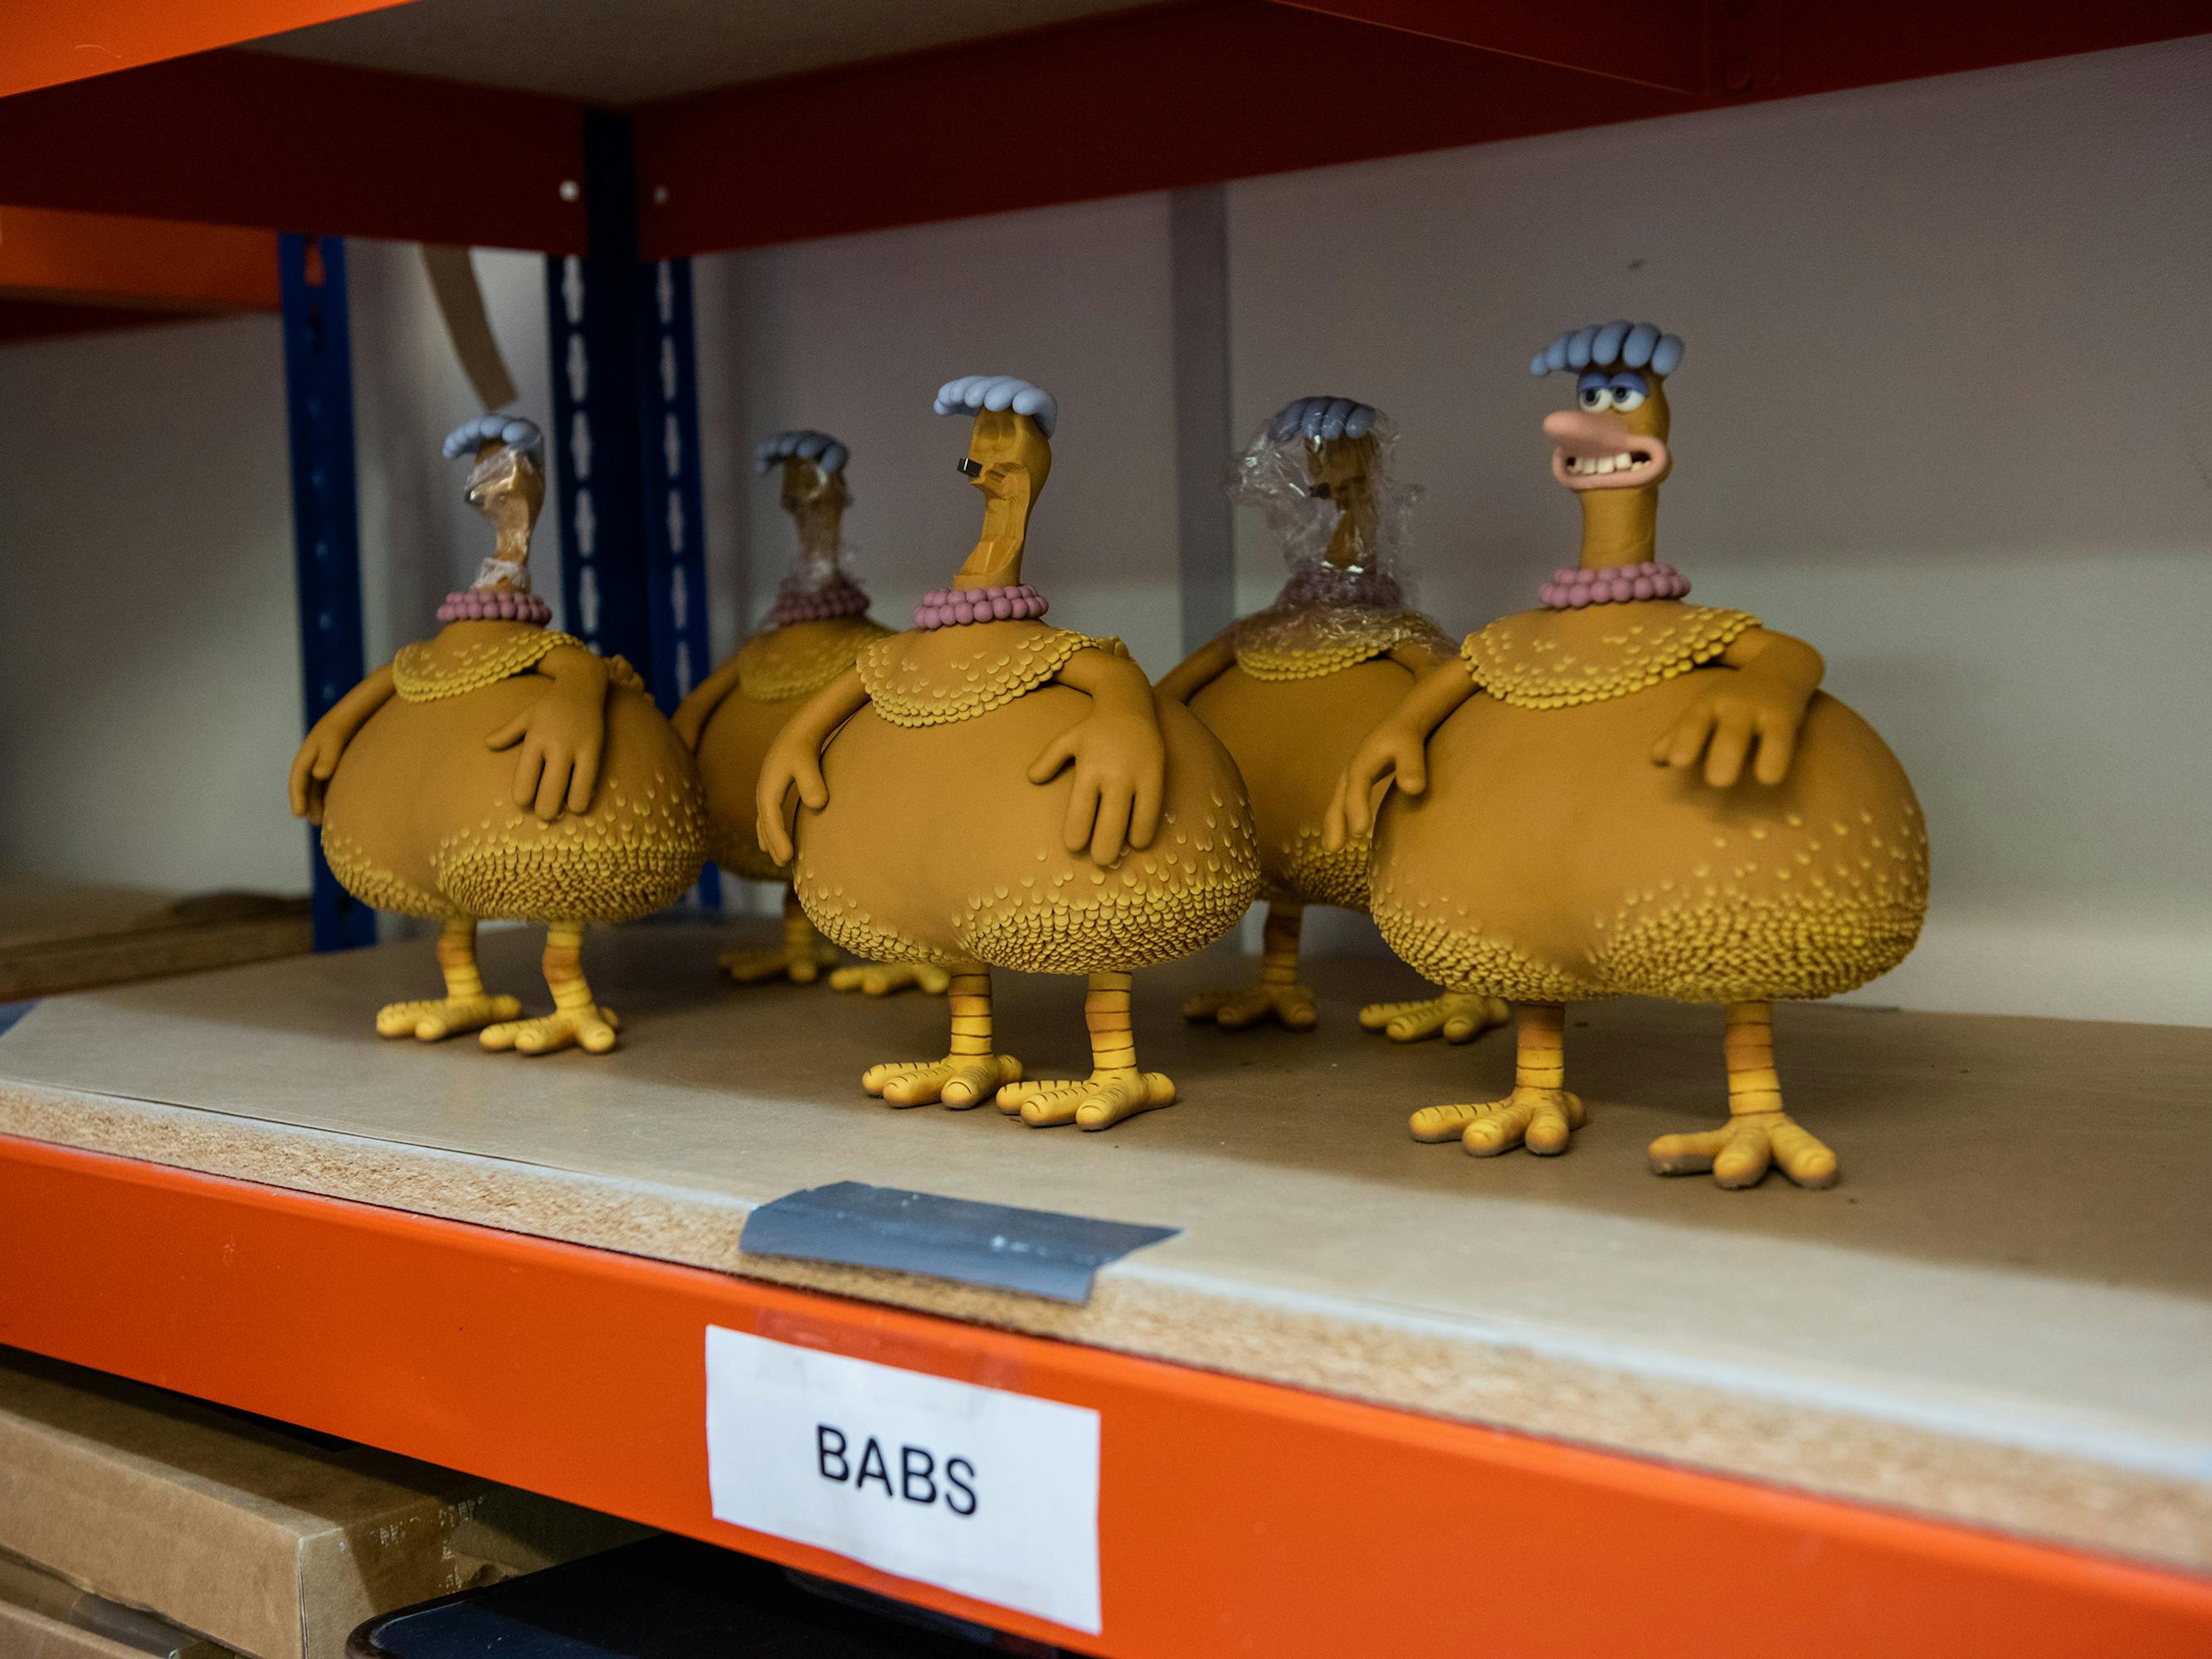 Some Babs puppets stand on an industrial shelf.